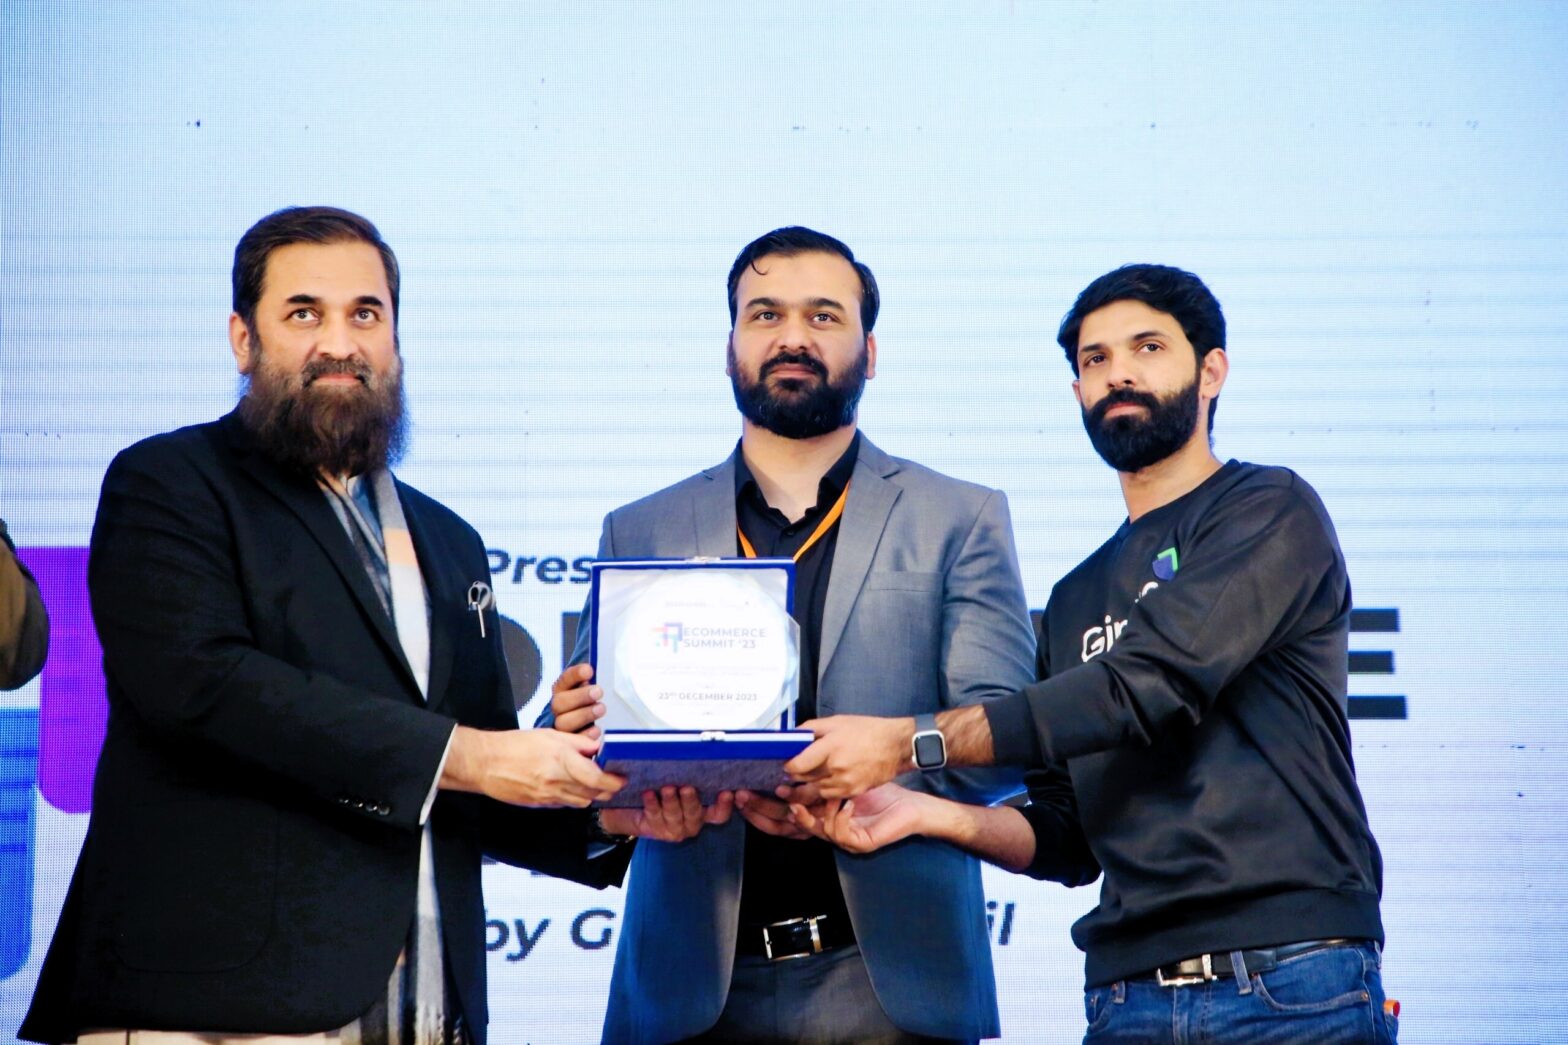 Ecommerce and Tech Leader Recognition Obaid Arshad